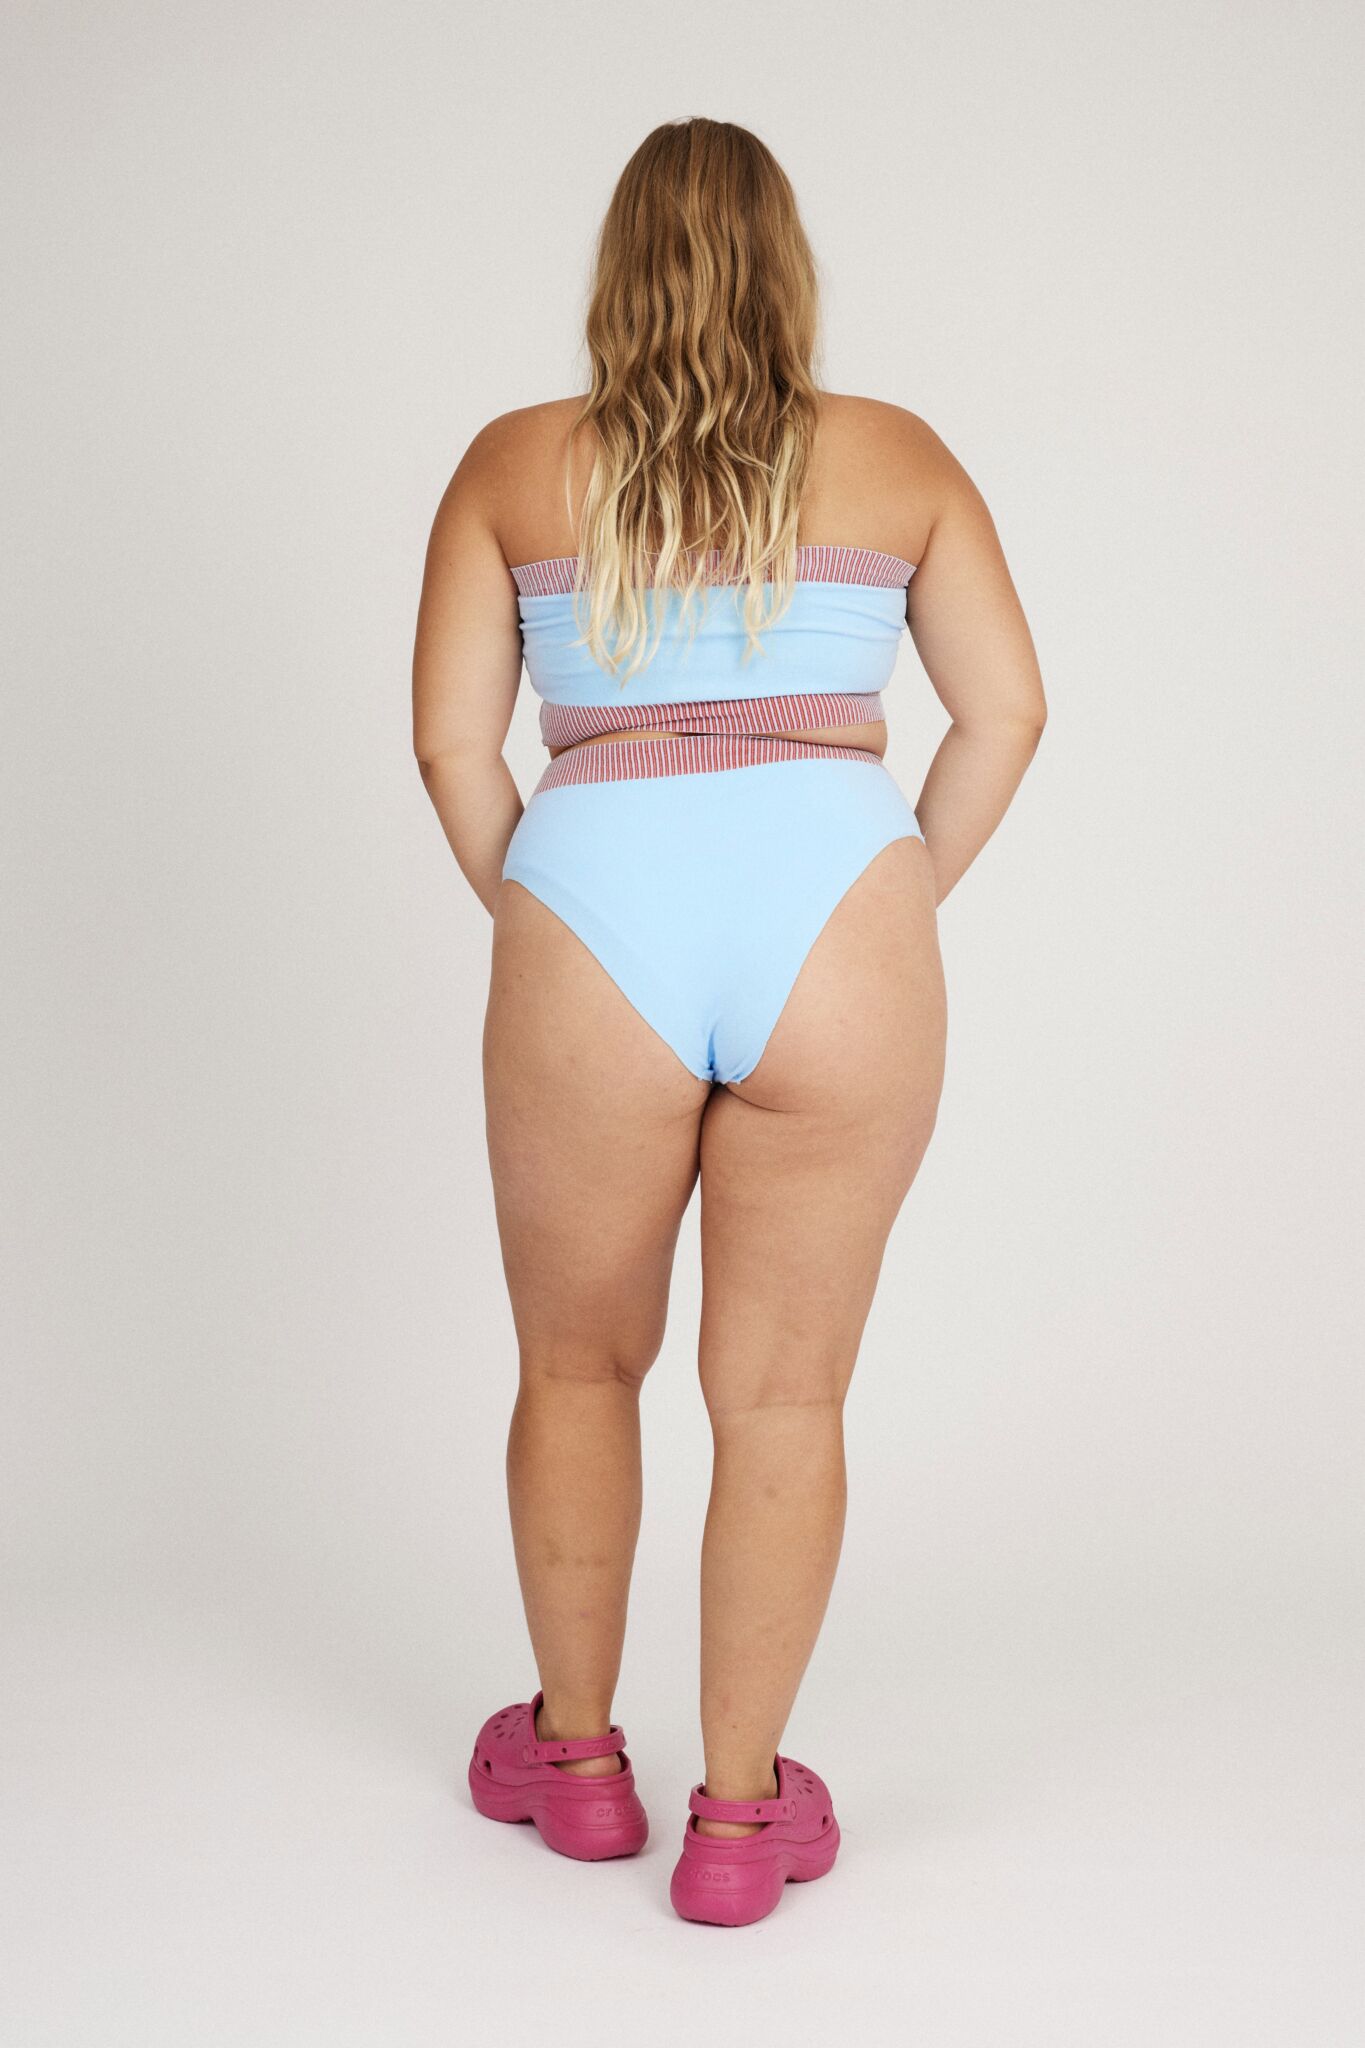 Spring Bloomer Top in light blue and red is a knitted sporty tube top with logo and ribbed edges. Knitted in a body fitted, yet flexible material that adapts to the body. Can be mixed and matched with Spring Bloomer Panty and be used as swimwear.